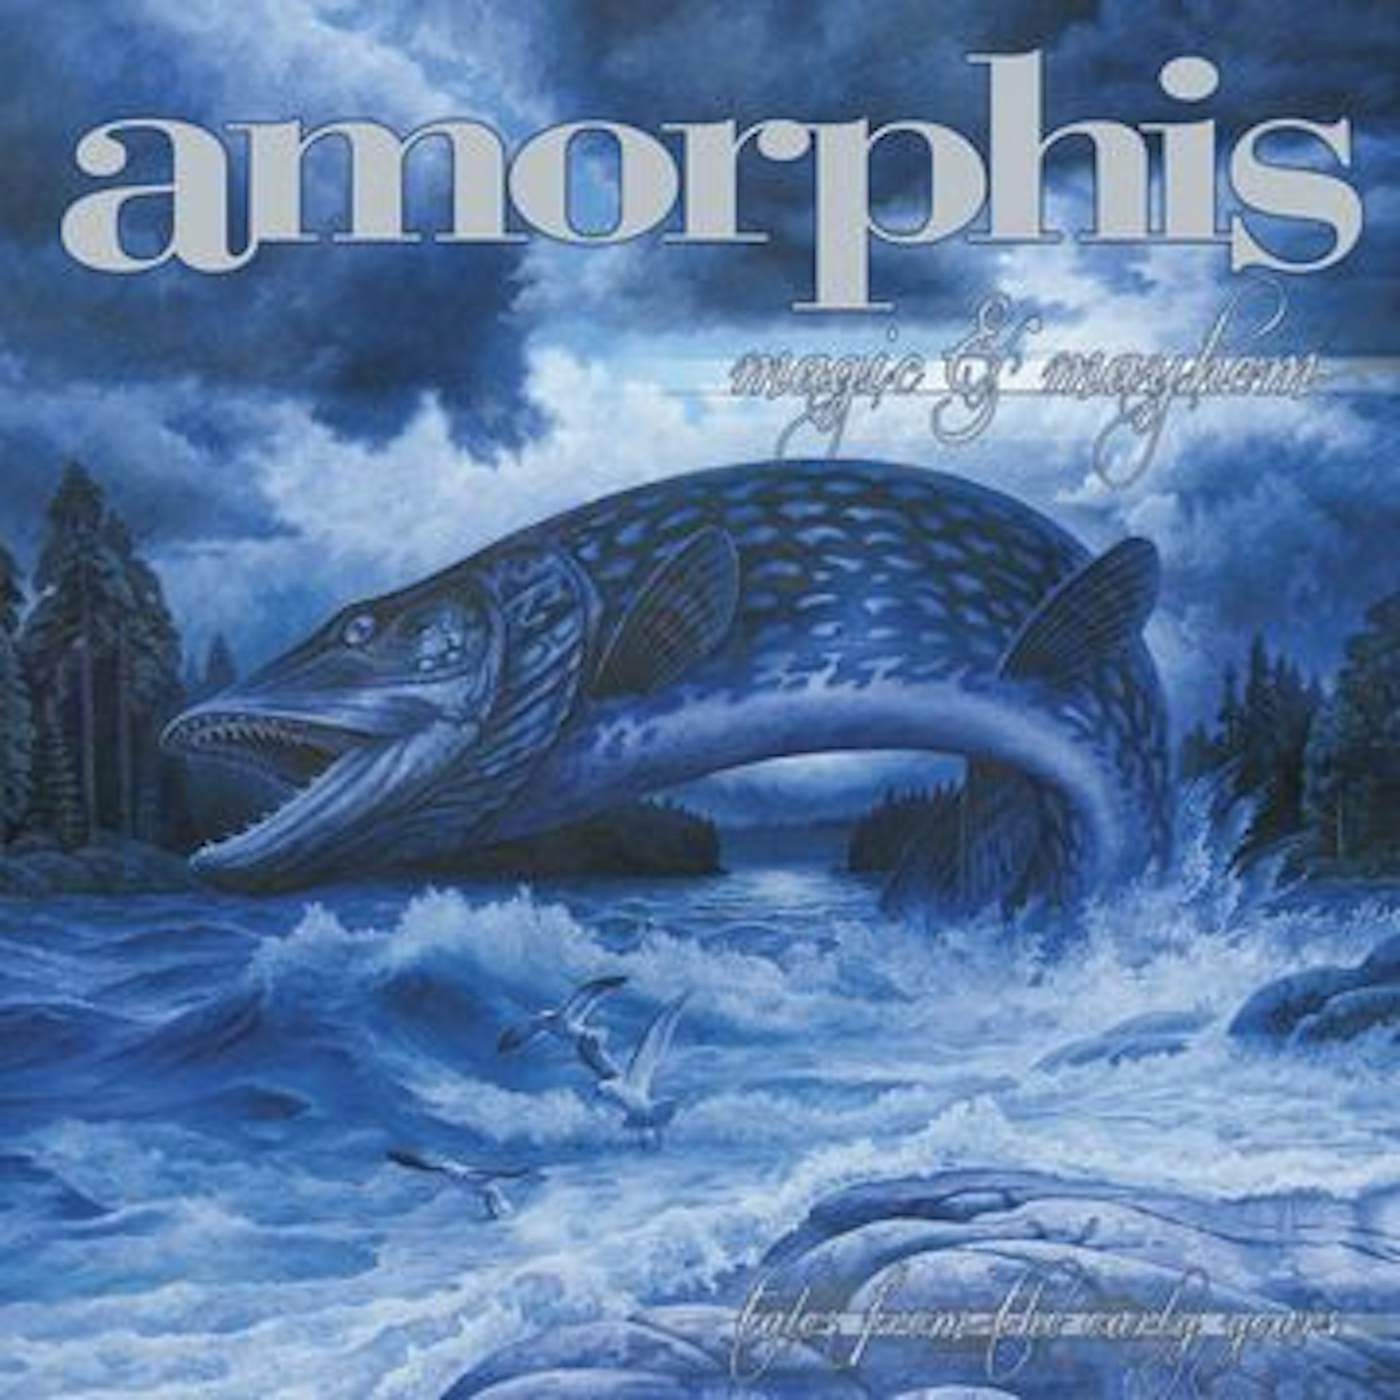 Amorphis Magic & Mayhem - Tales From The Early Years Vinyl Record